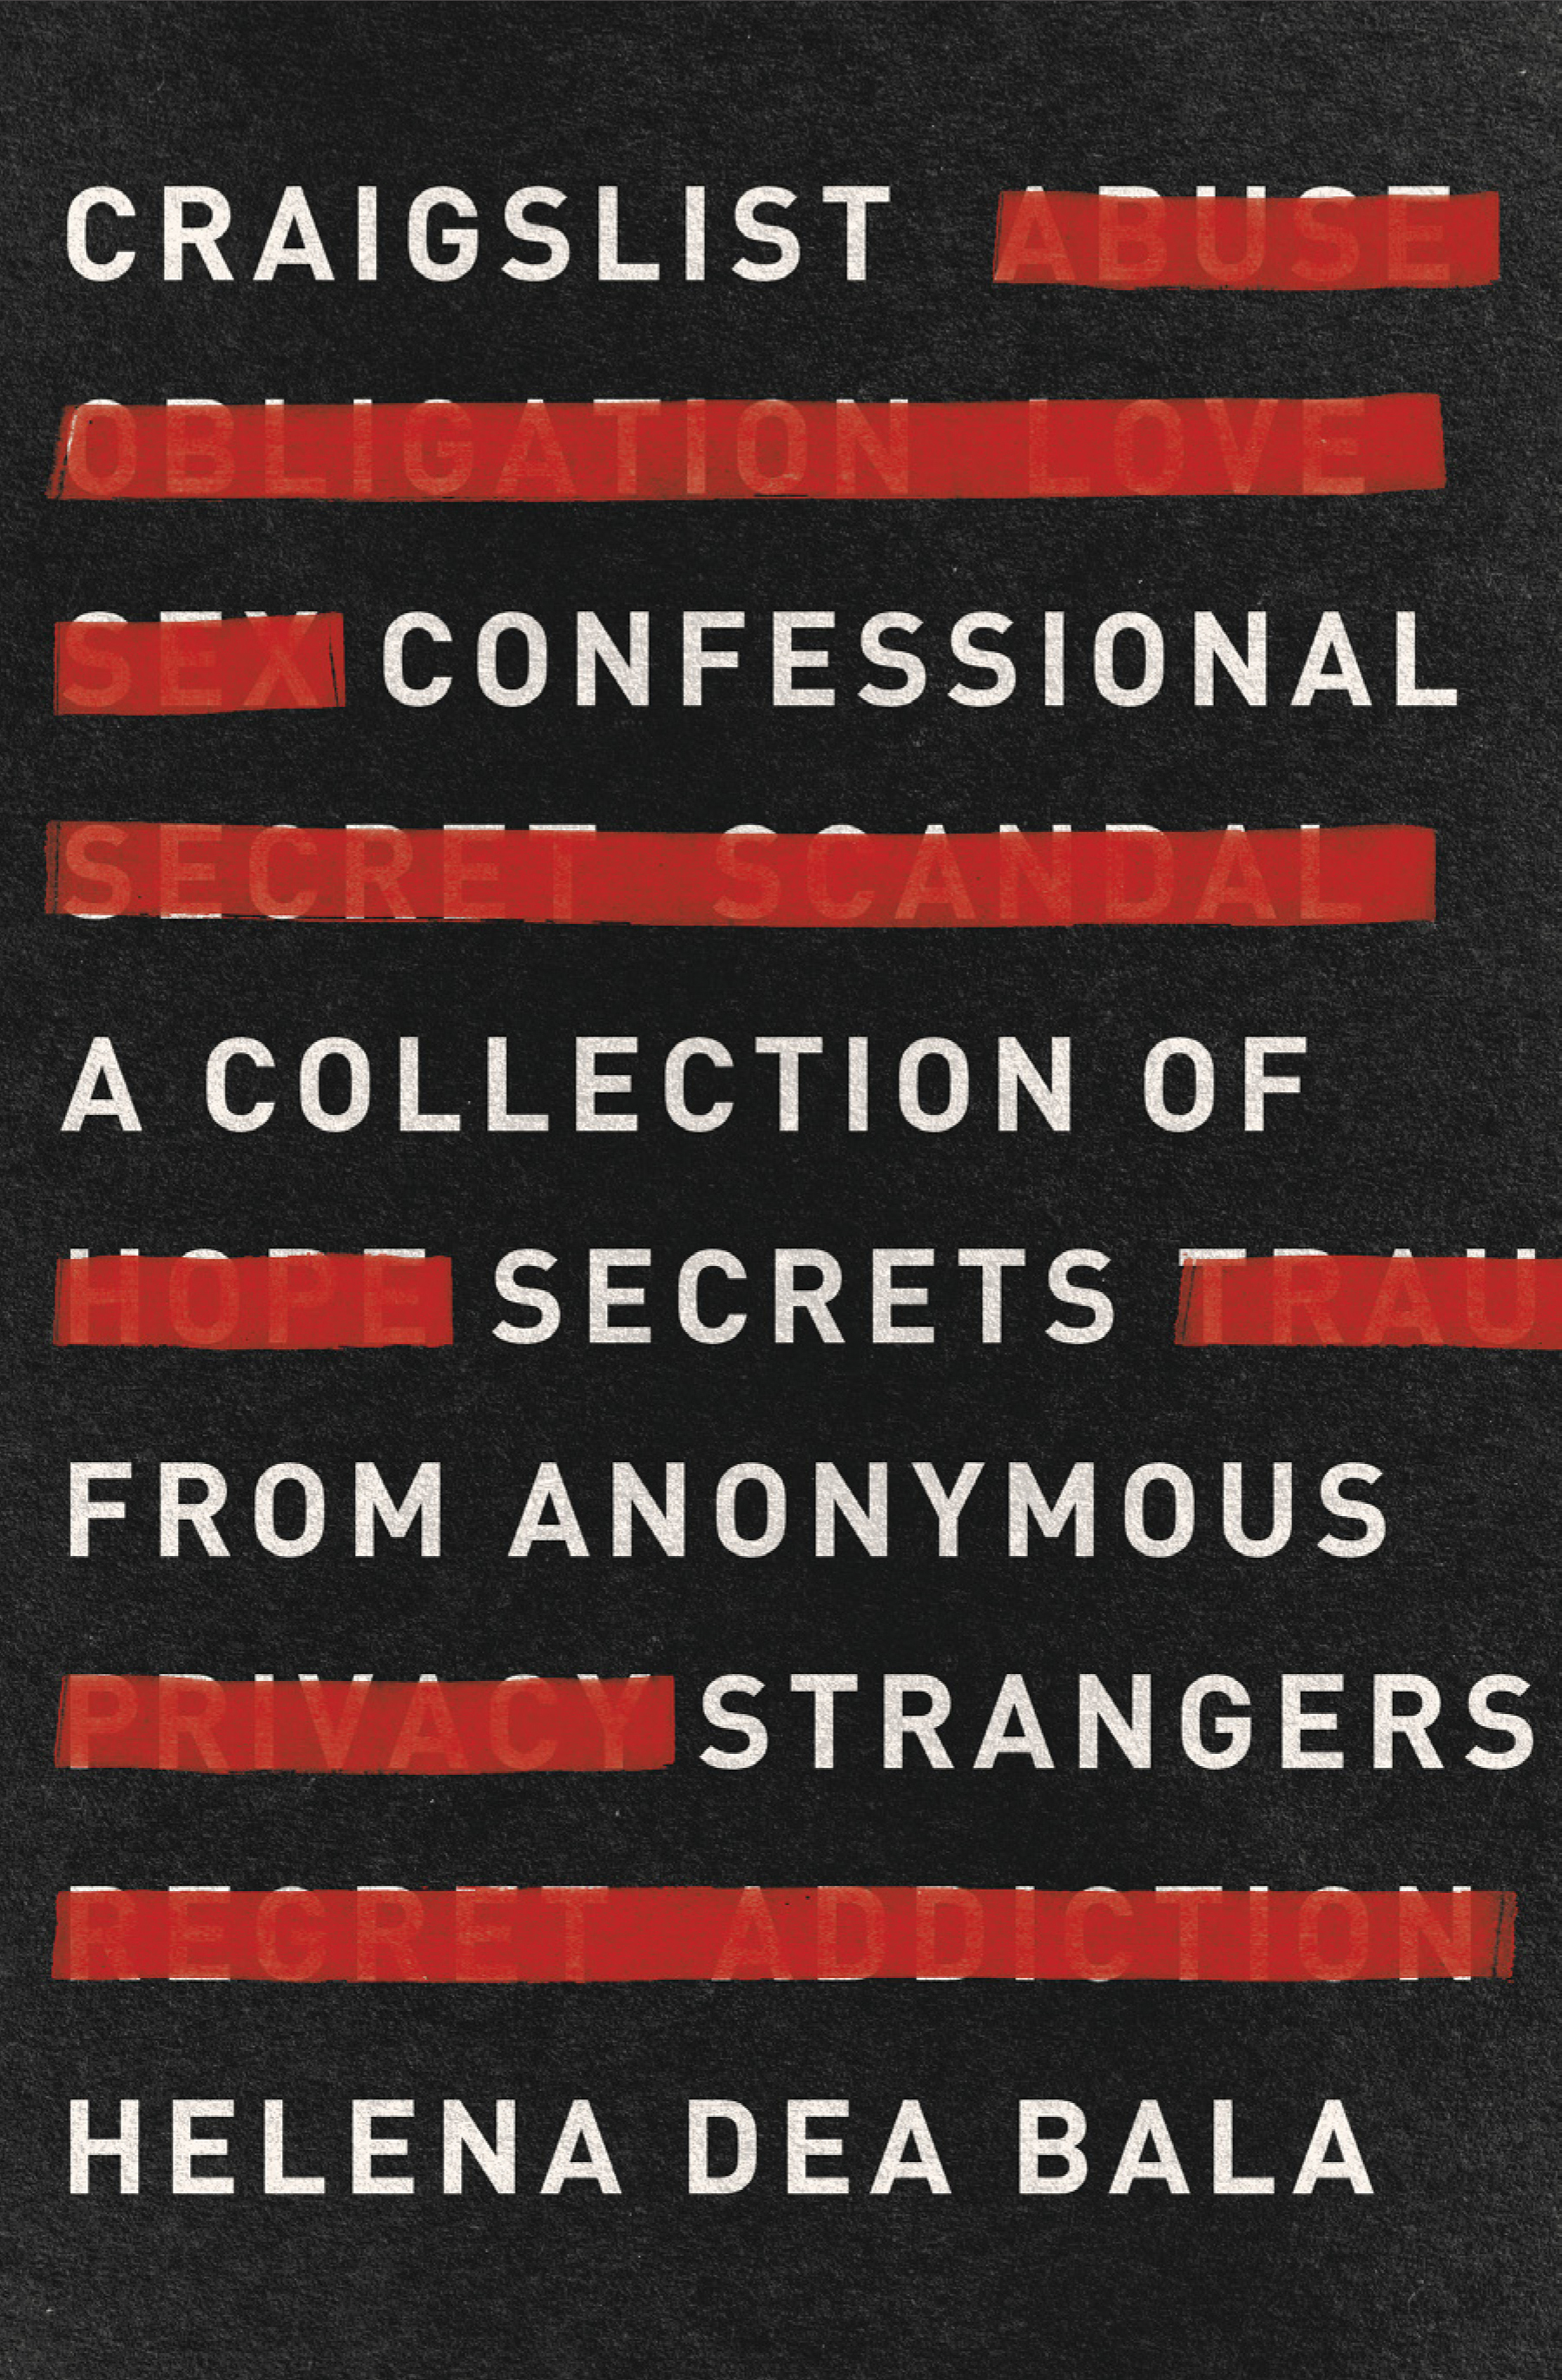 [EPUB] Craigslist Confessional: A Collection of Secrets from Anonymous Strangers by Helena Dea Bala